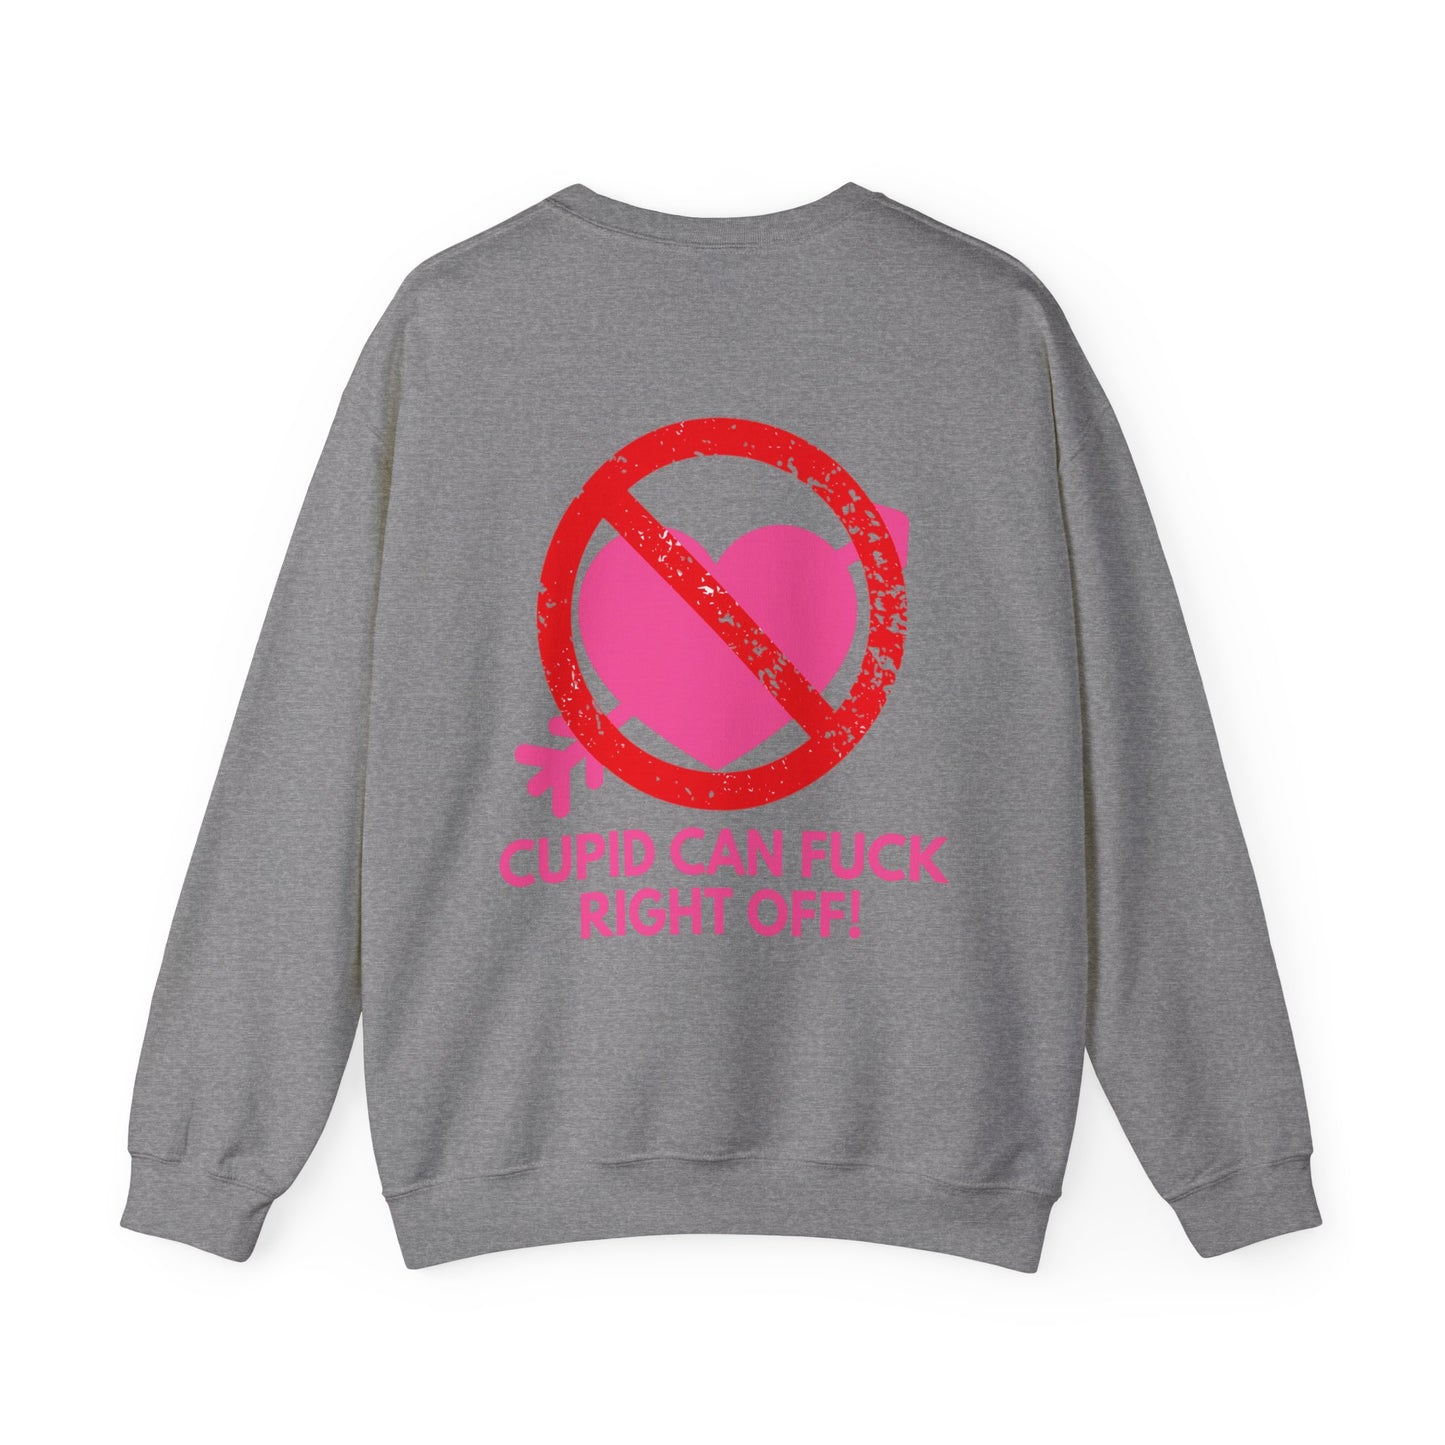 Cupid Can Fuck Off Unisex Heavy Blend™ Crewneck Sweatshirt Gift Funny Laugh Valentine's Day